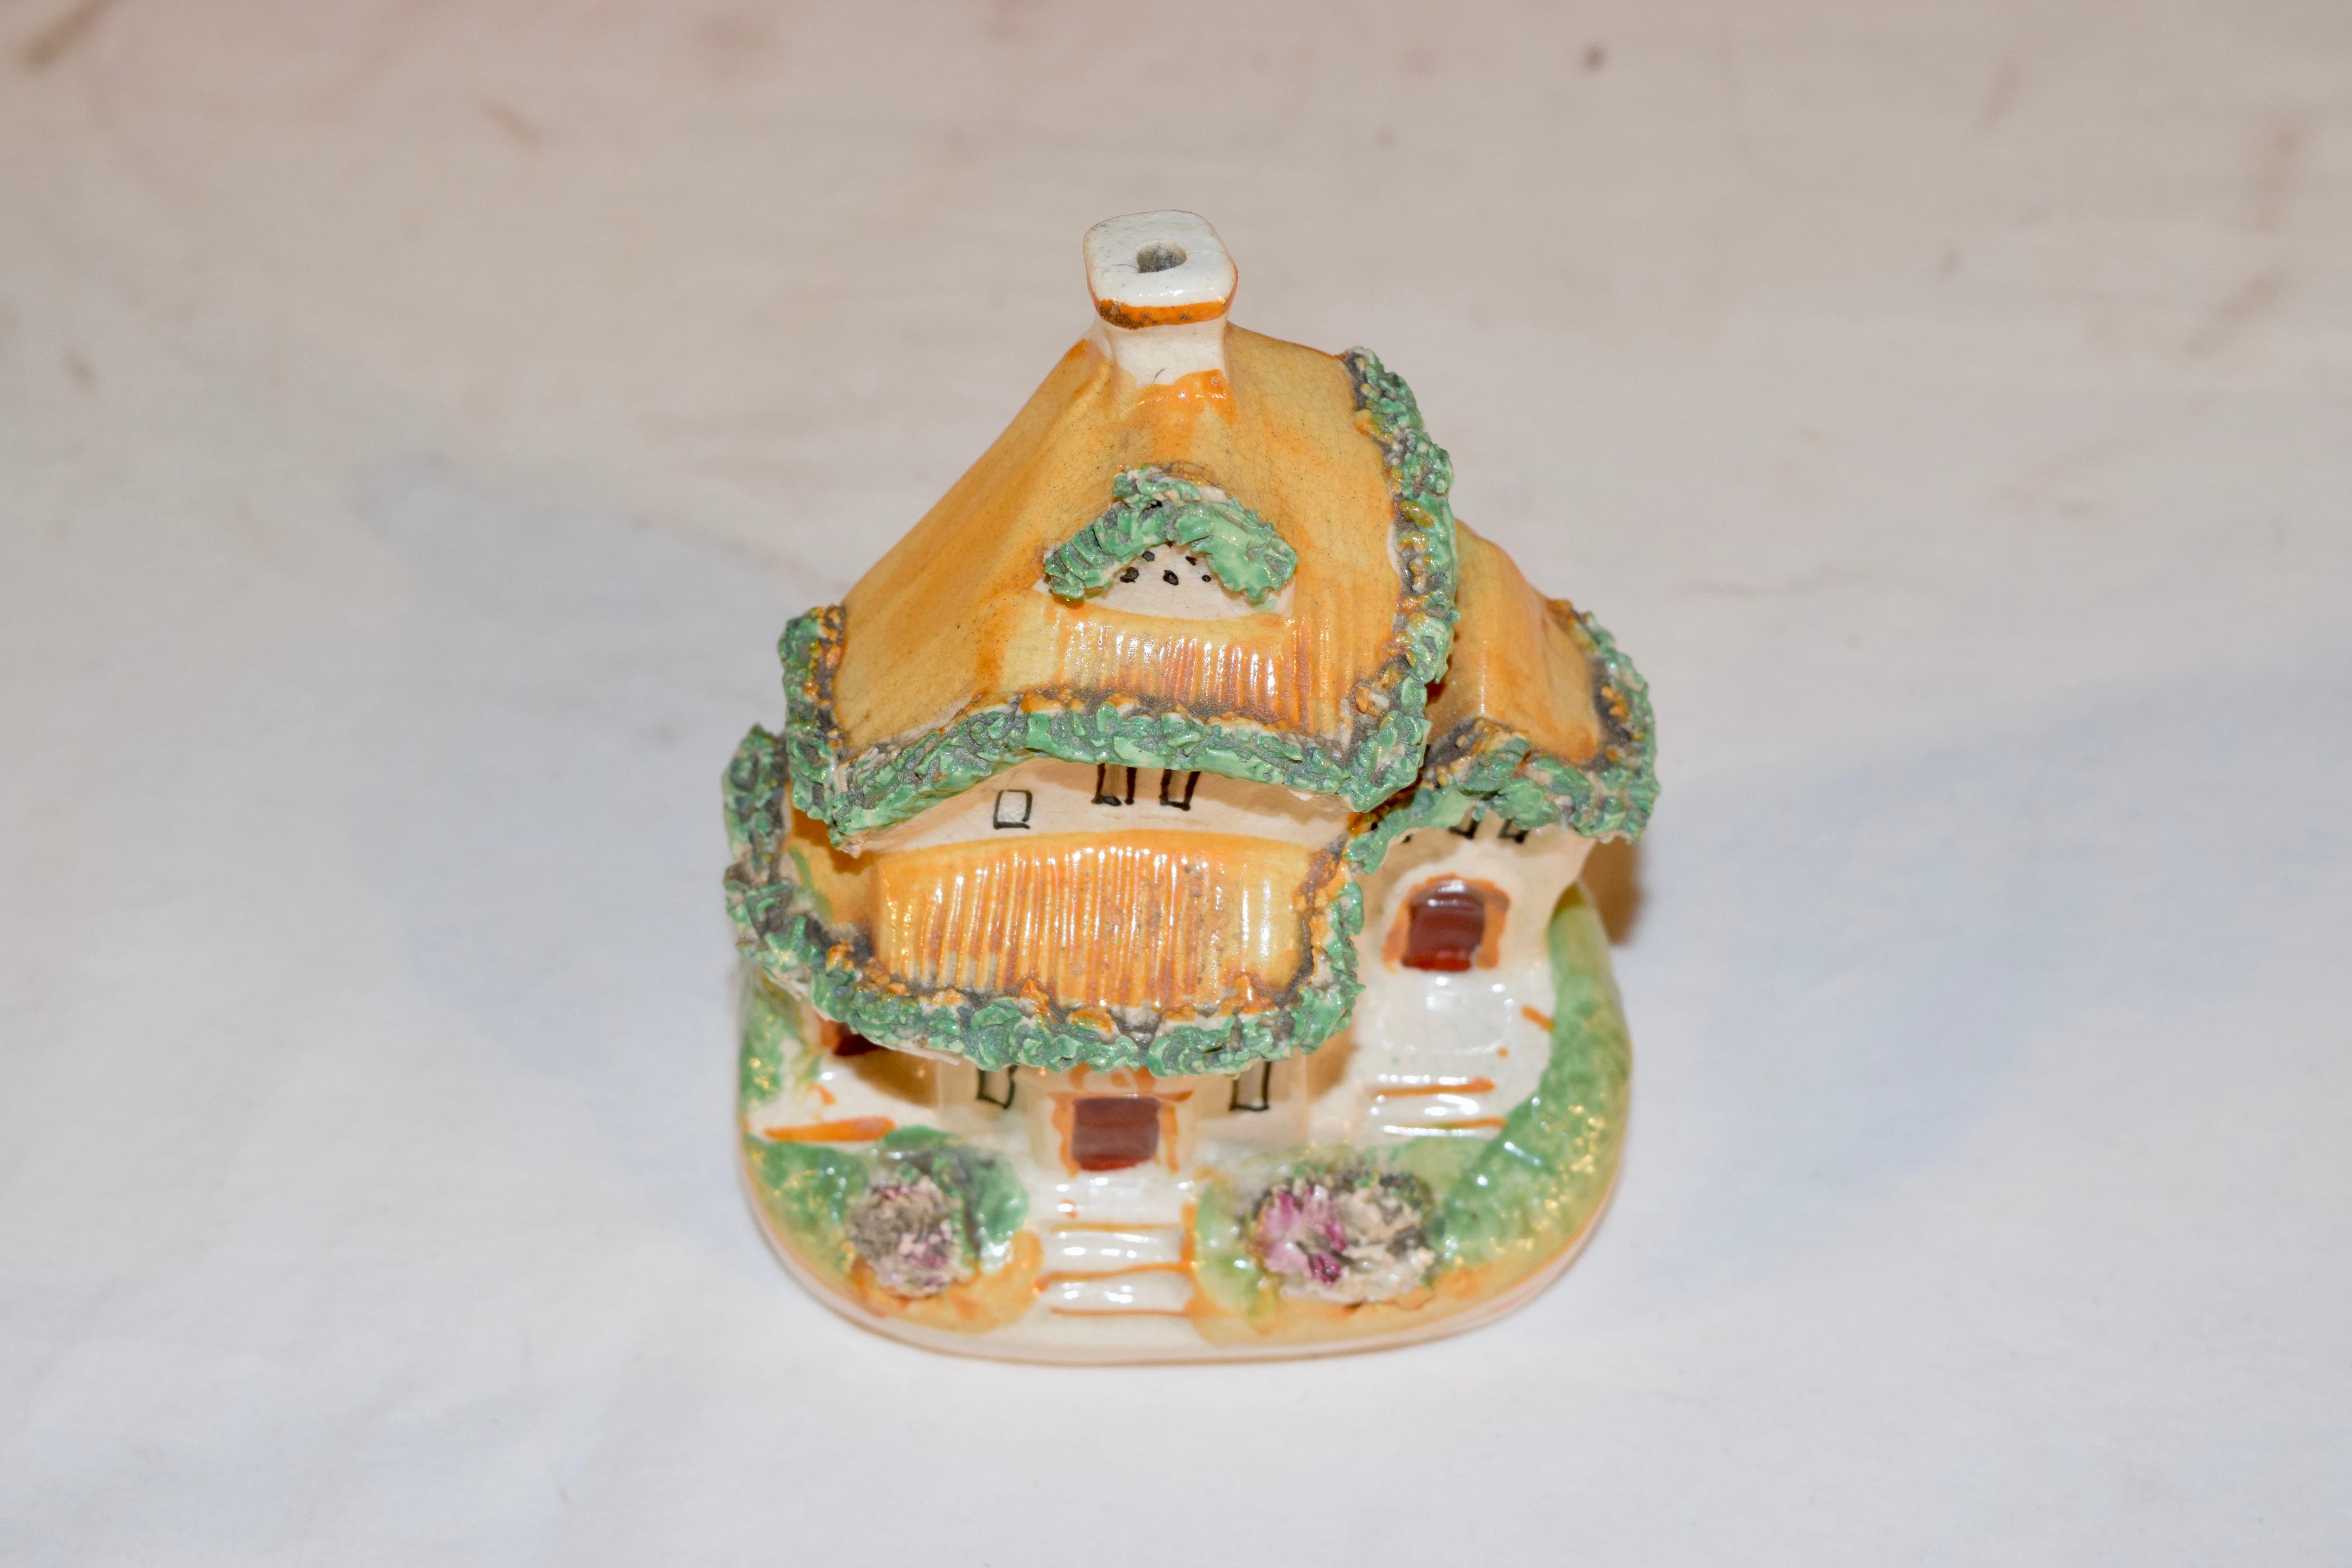 19th century Staffordshire cottage. Very folky with a 